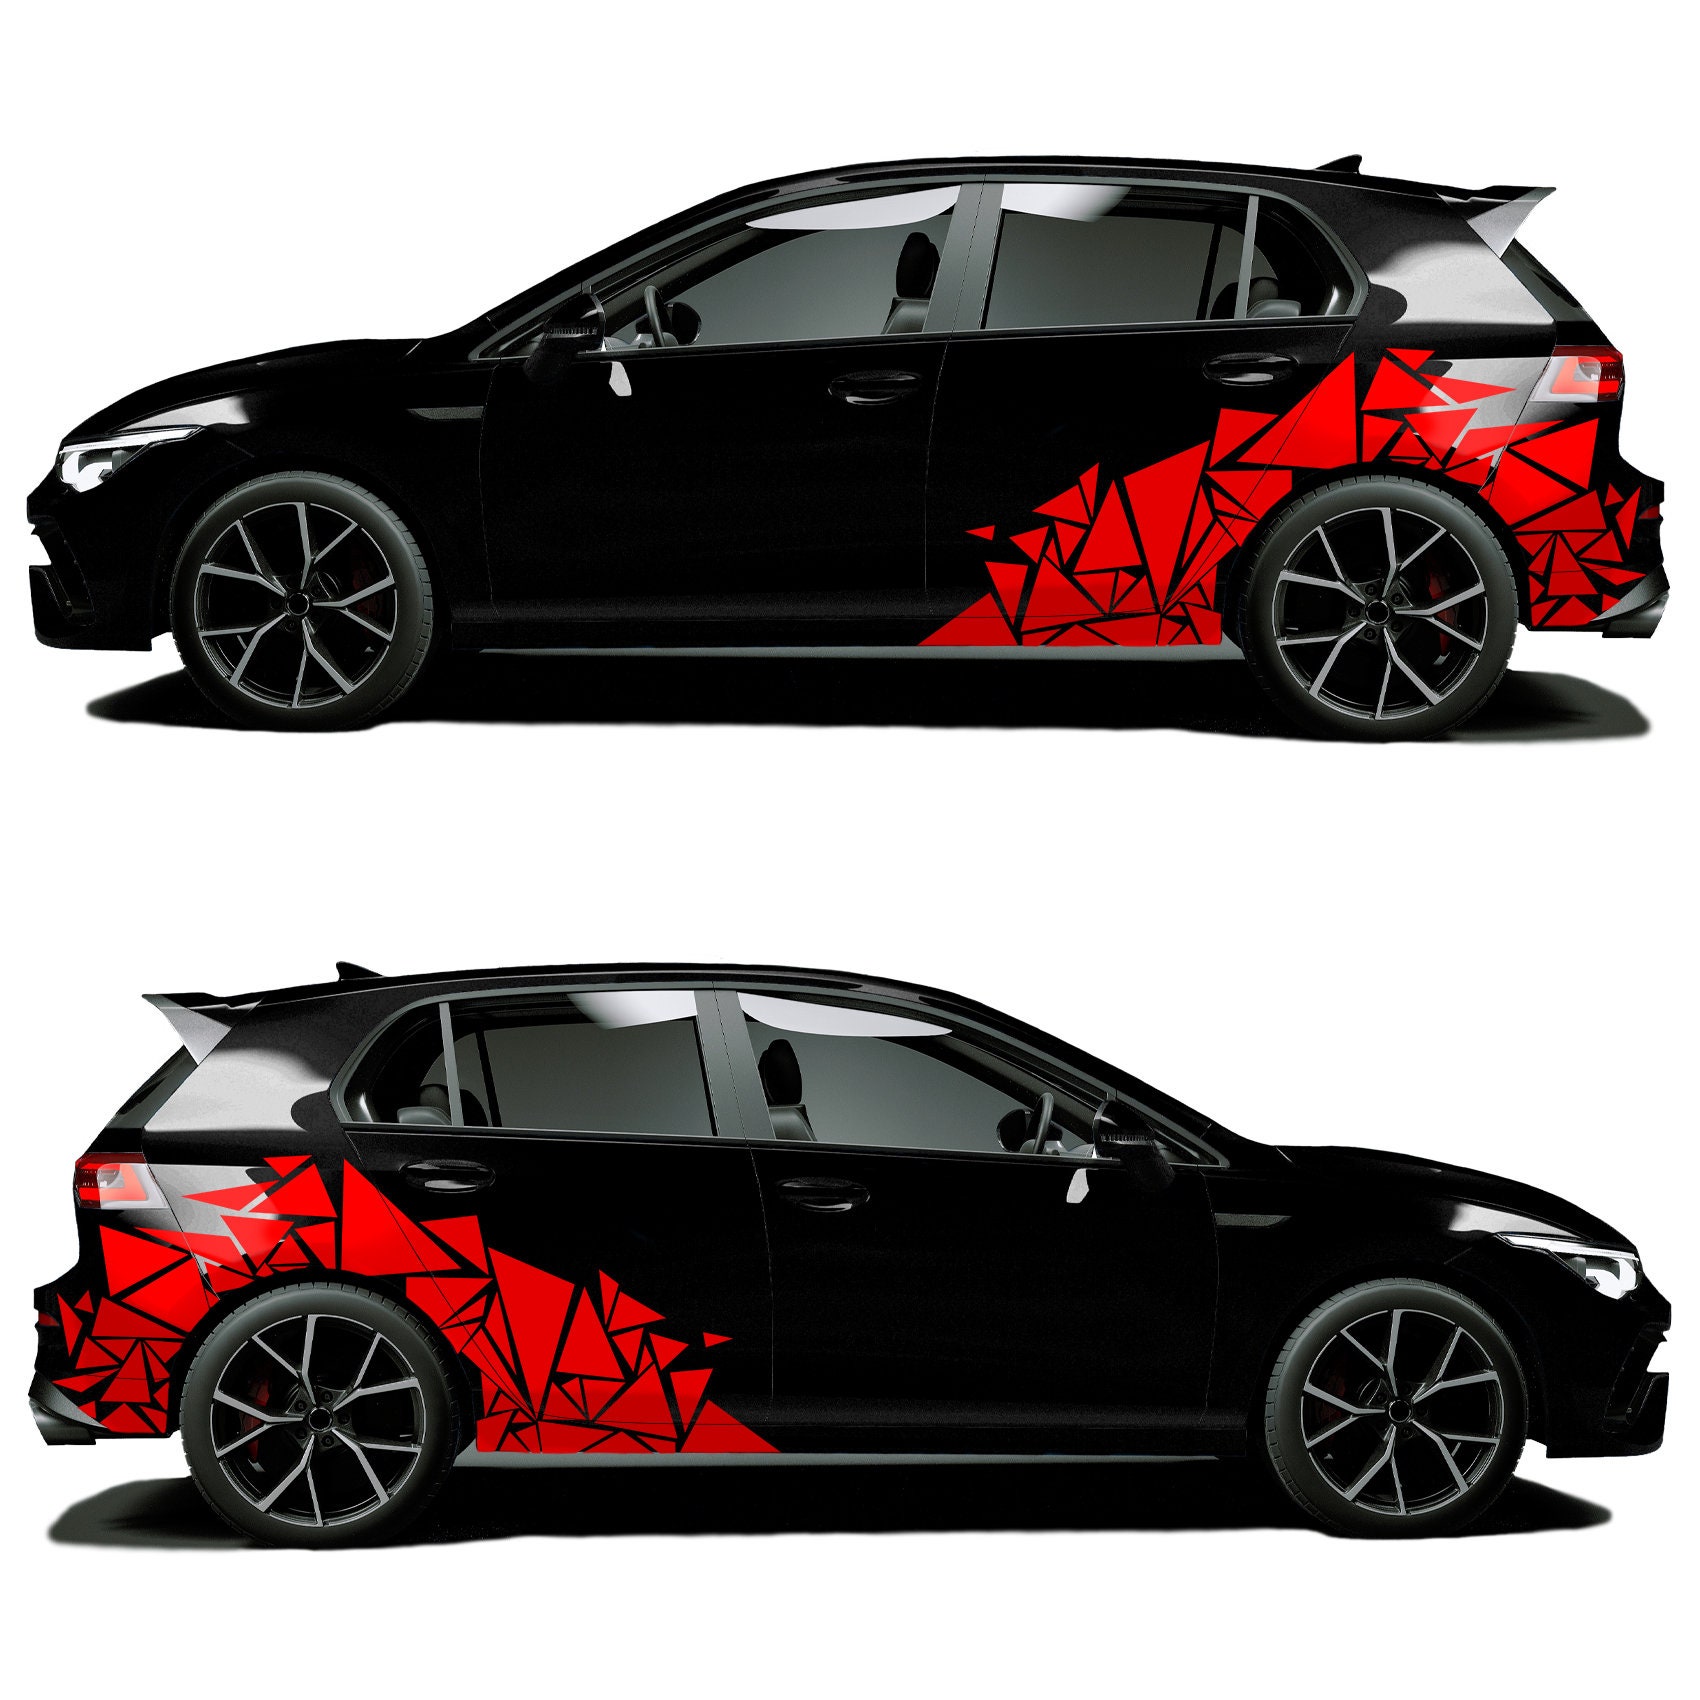 Car Stickers - 13cm x 6cm For RED of Bull Graphics Car Stickers and Decals  3D Vinyl Car Warp for Car Body Windshield Bumper (Style A) price in UAE,  UAE